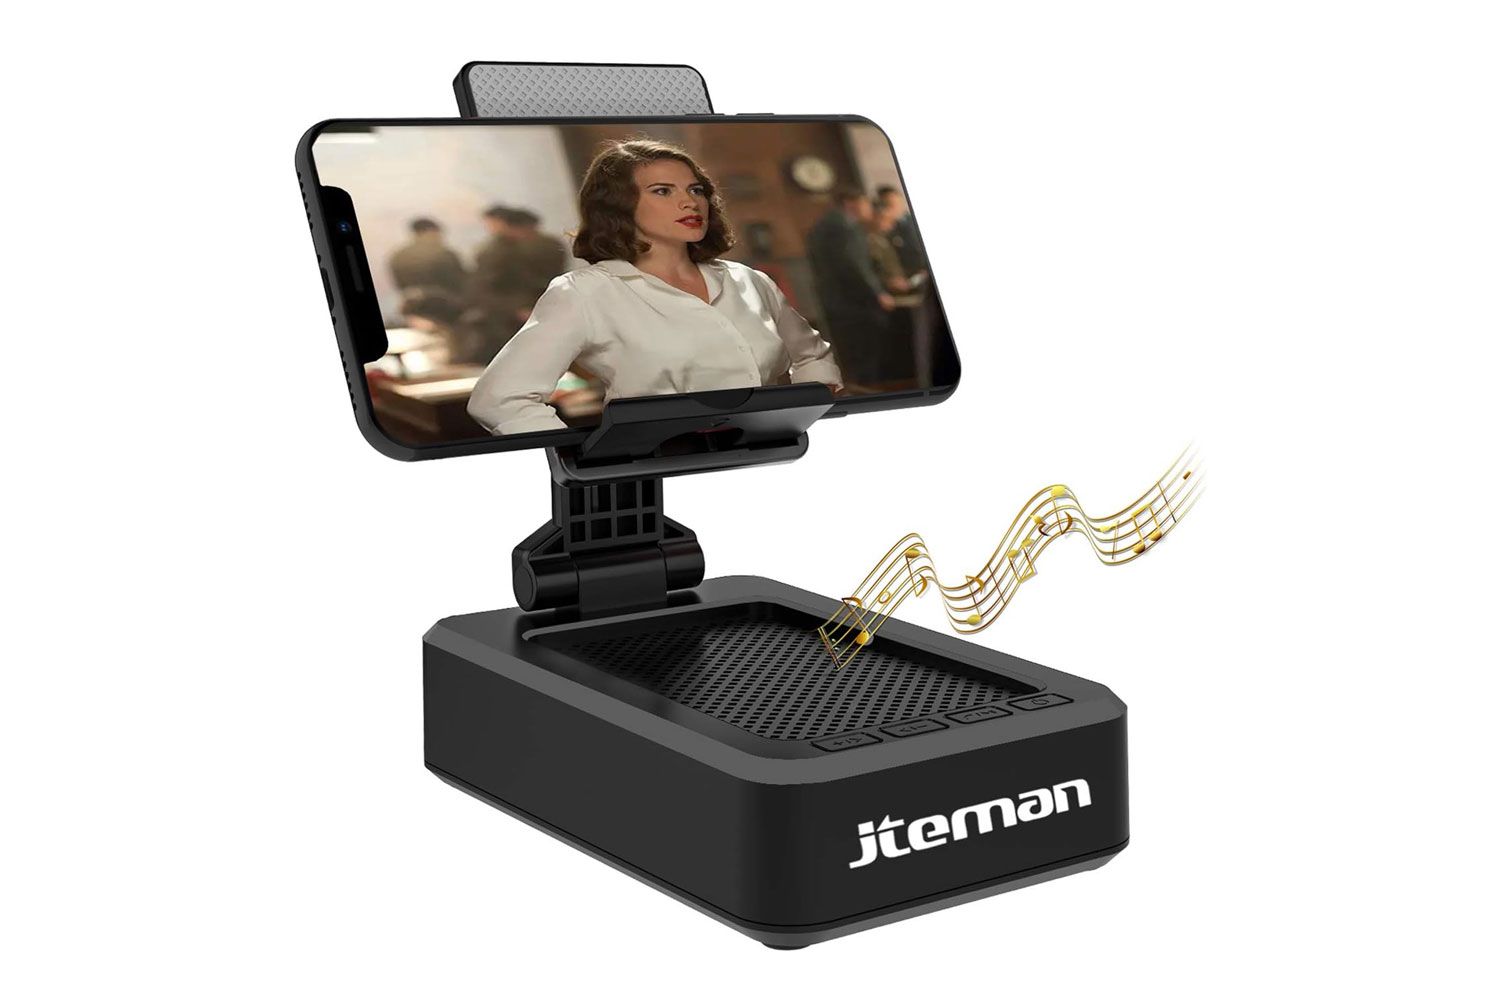 Jteman Cell Phone Stand with Wireless Bluetooth Speaker